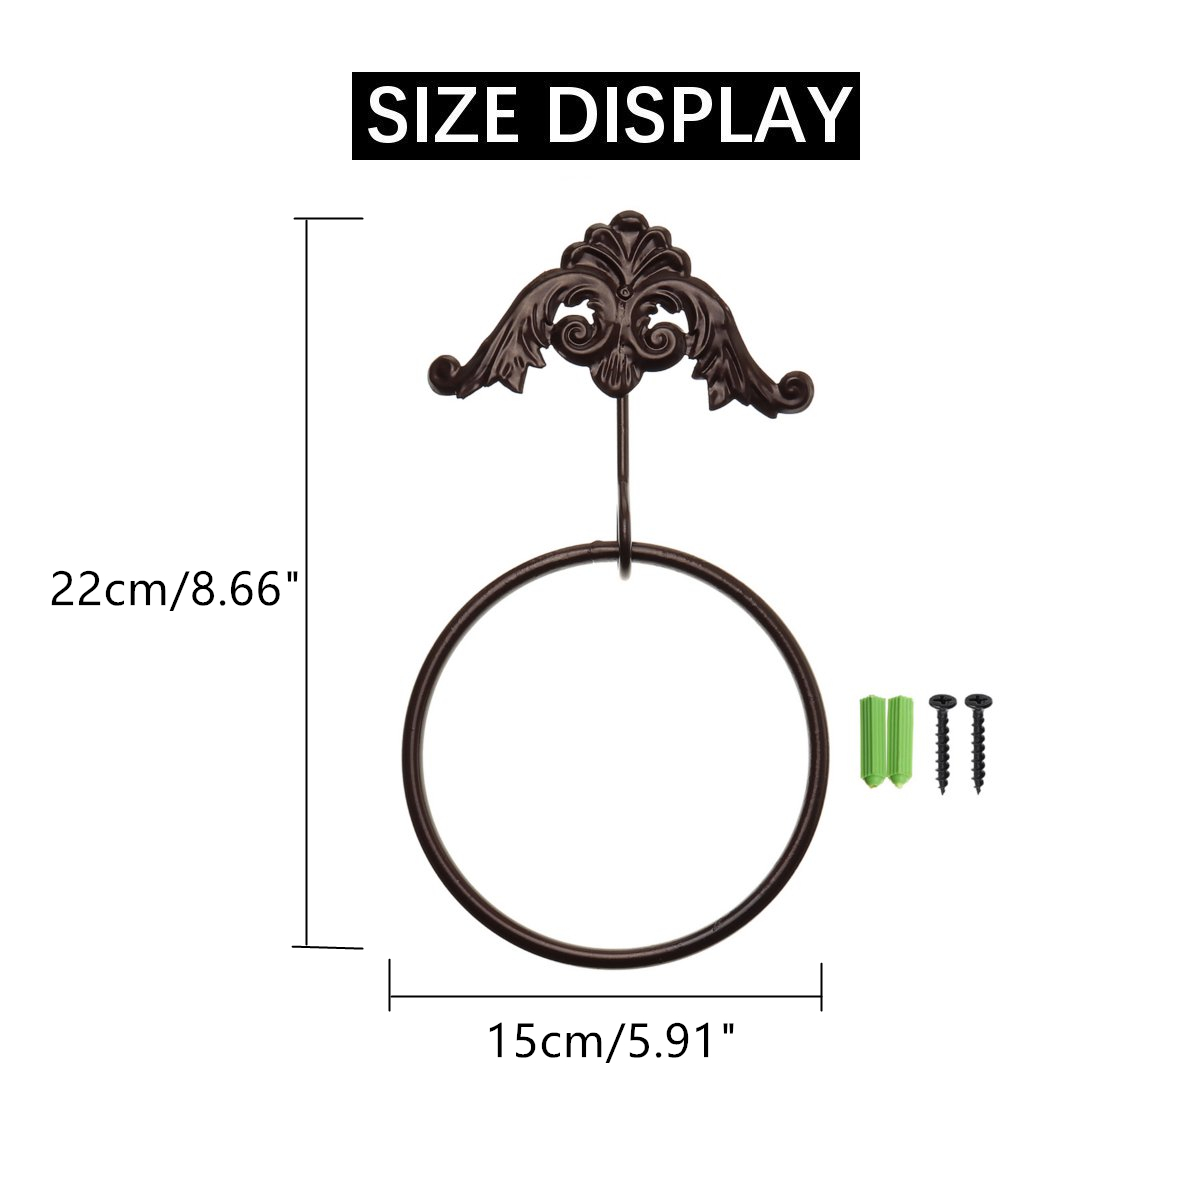 Stainless-Steel-Wall-Mounted-Bathroom-Toilet-Hand-Towel-Ring-Holder-1628709-3